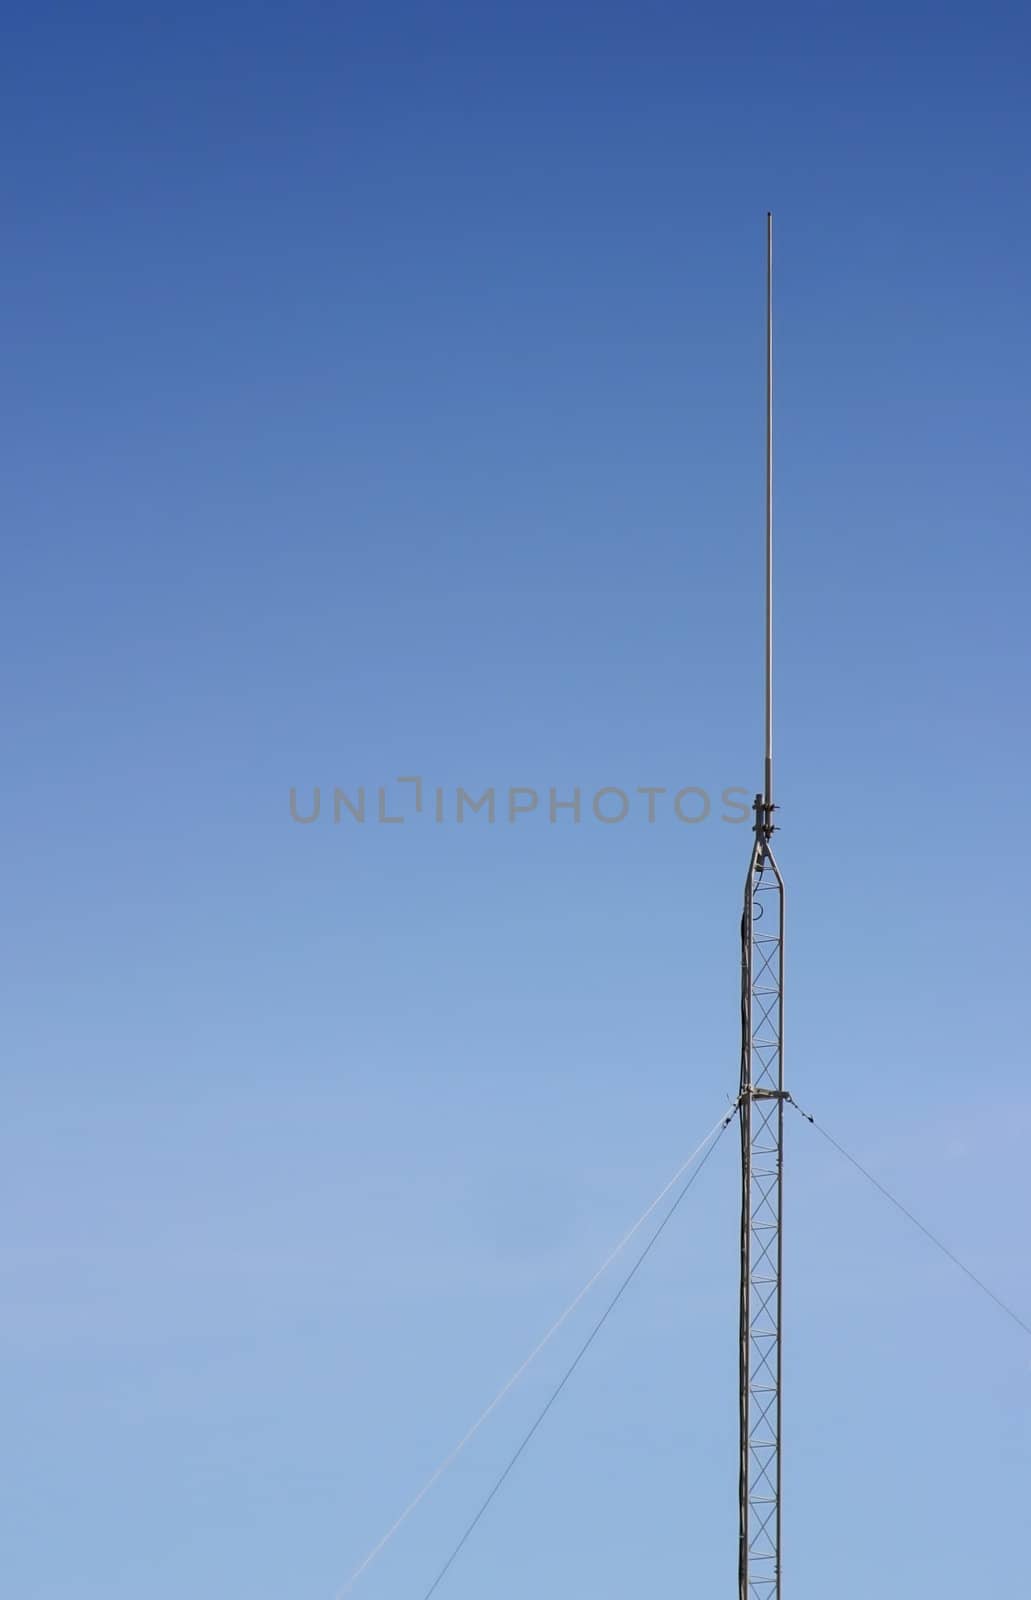 Radio antenna with the blue sky as a background